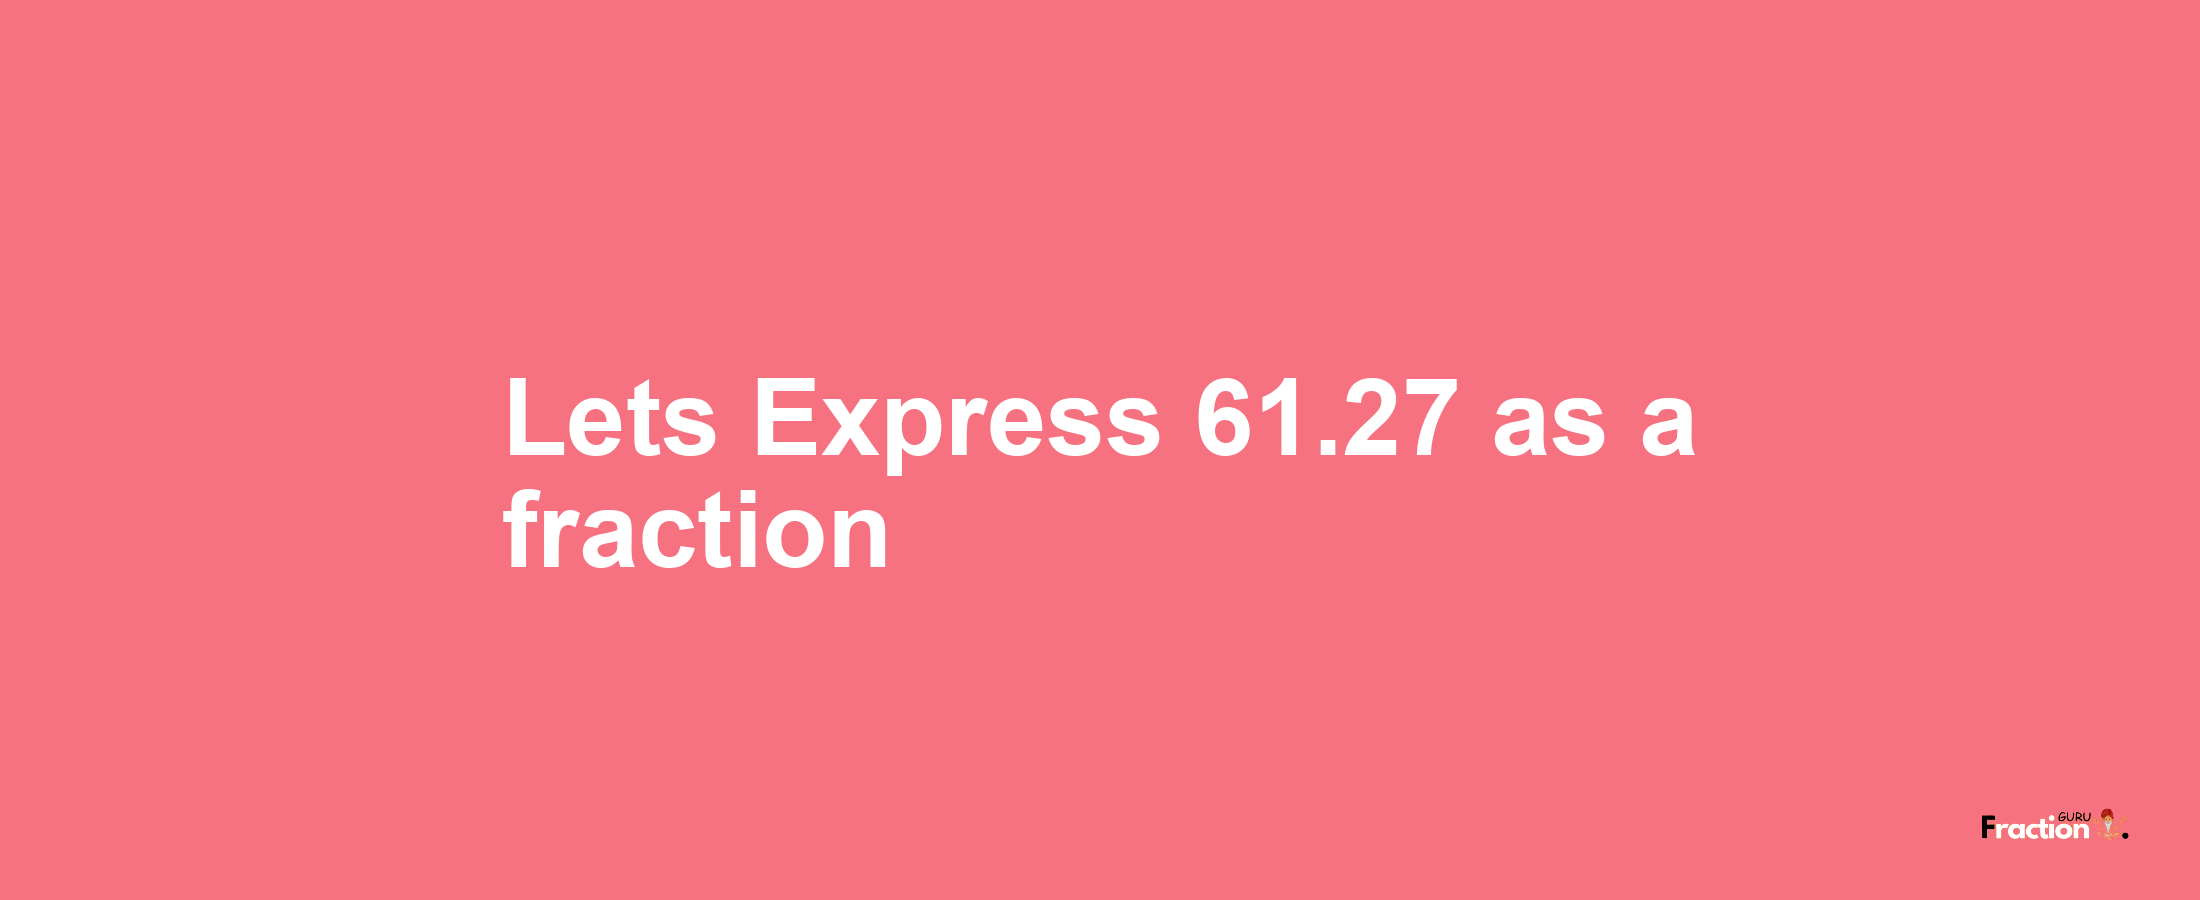 Lets Express 61.27 as afraction